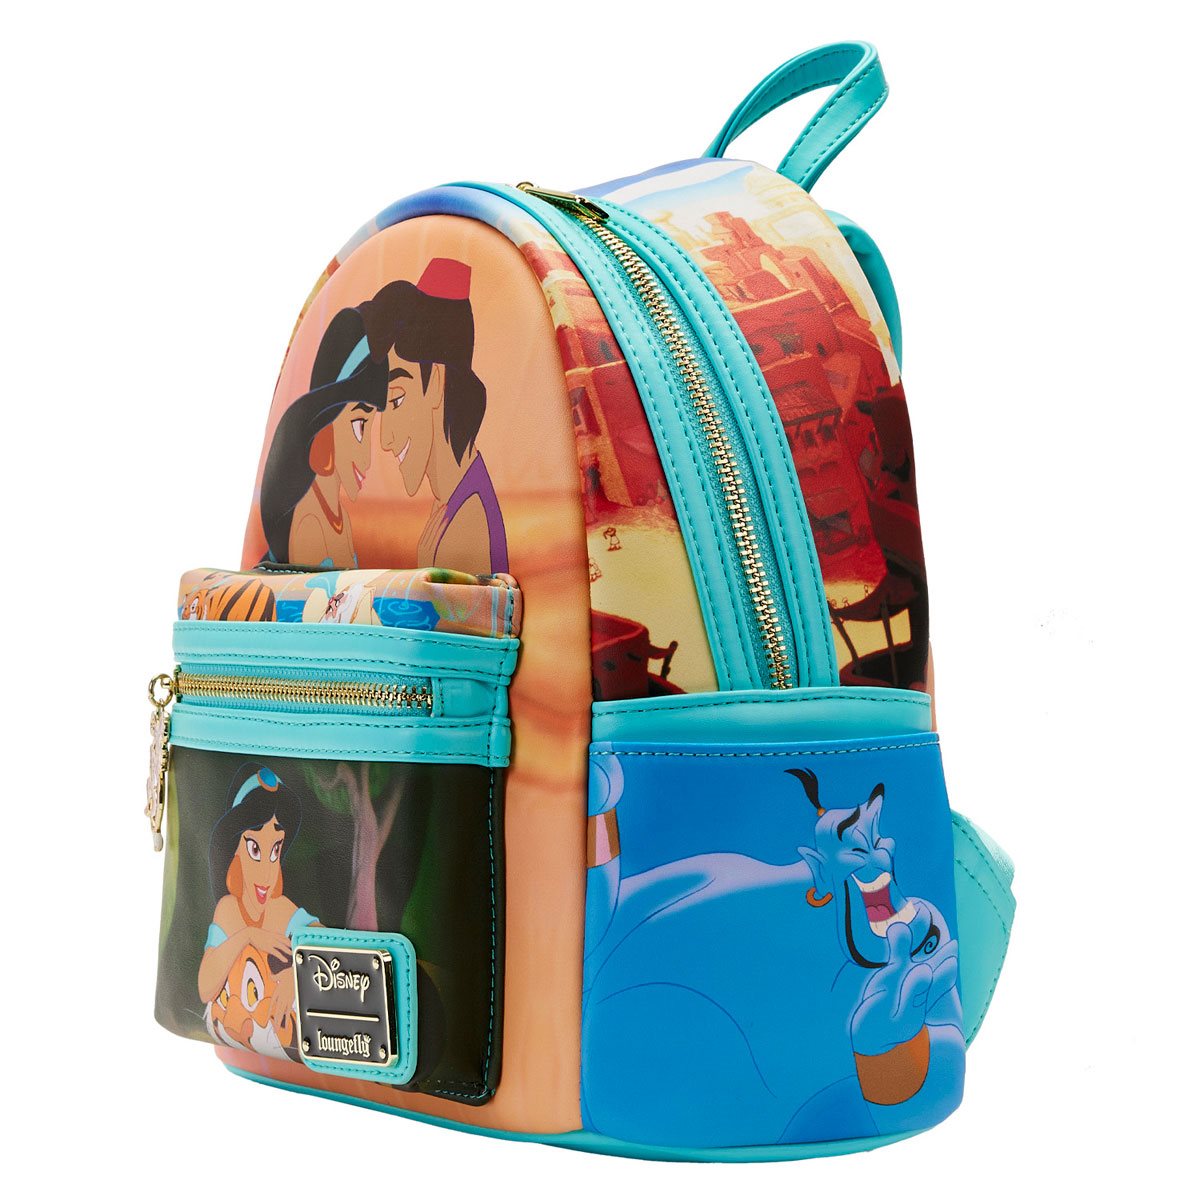 Aladdin Princess Jasmine Red Outfit Cosplay Mini-Backpack